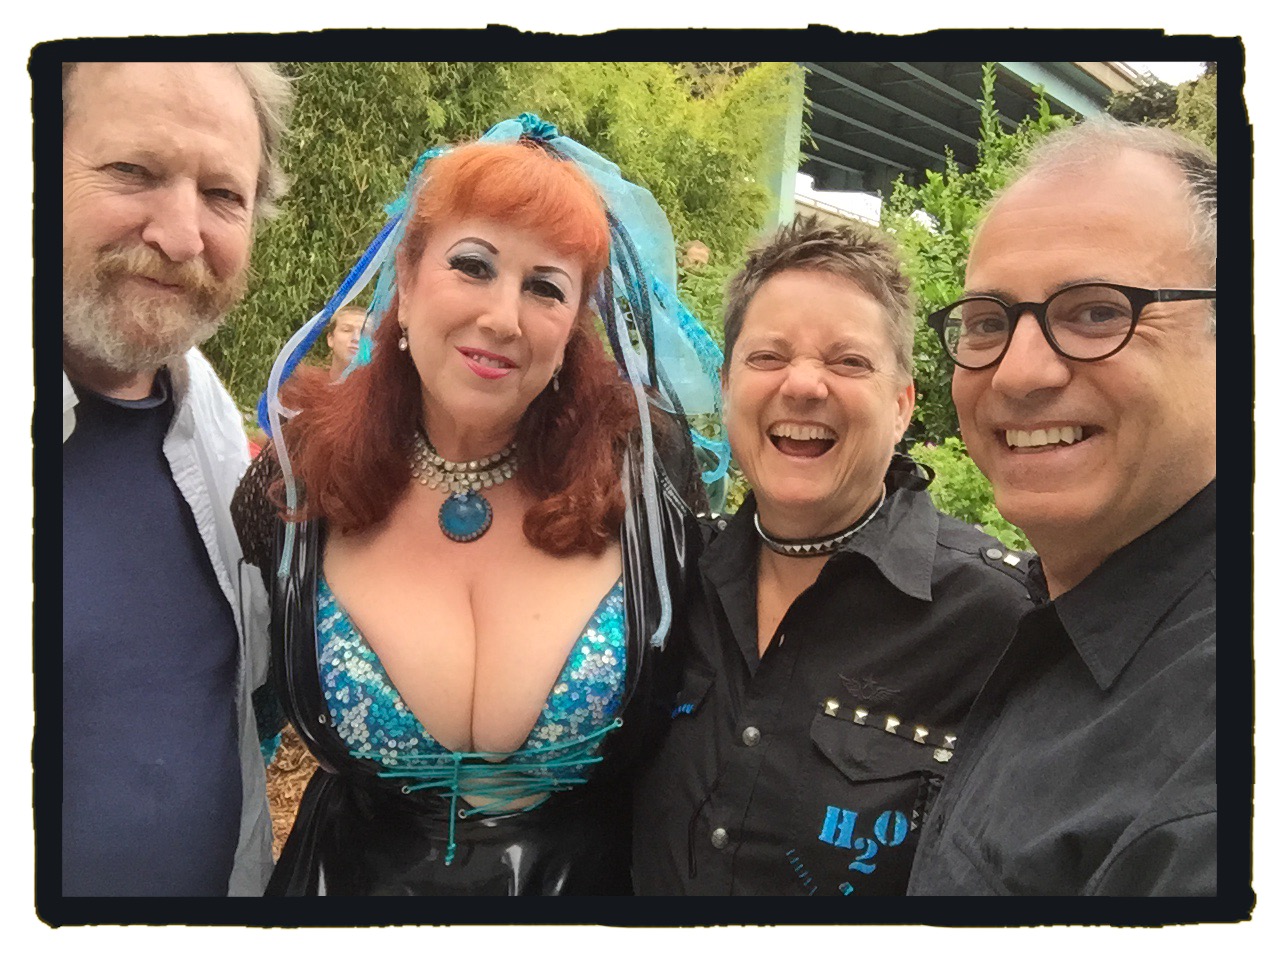 thecrewof with annie sprinkle and beth stephens at somarts cultural center